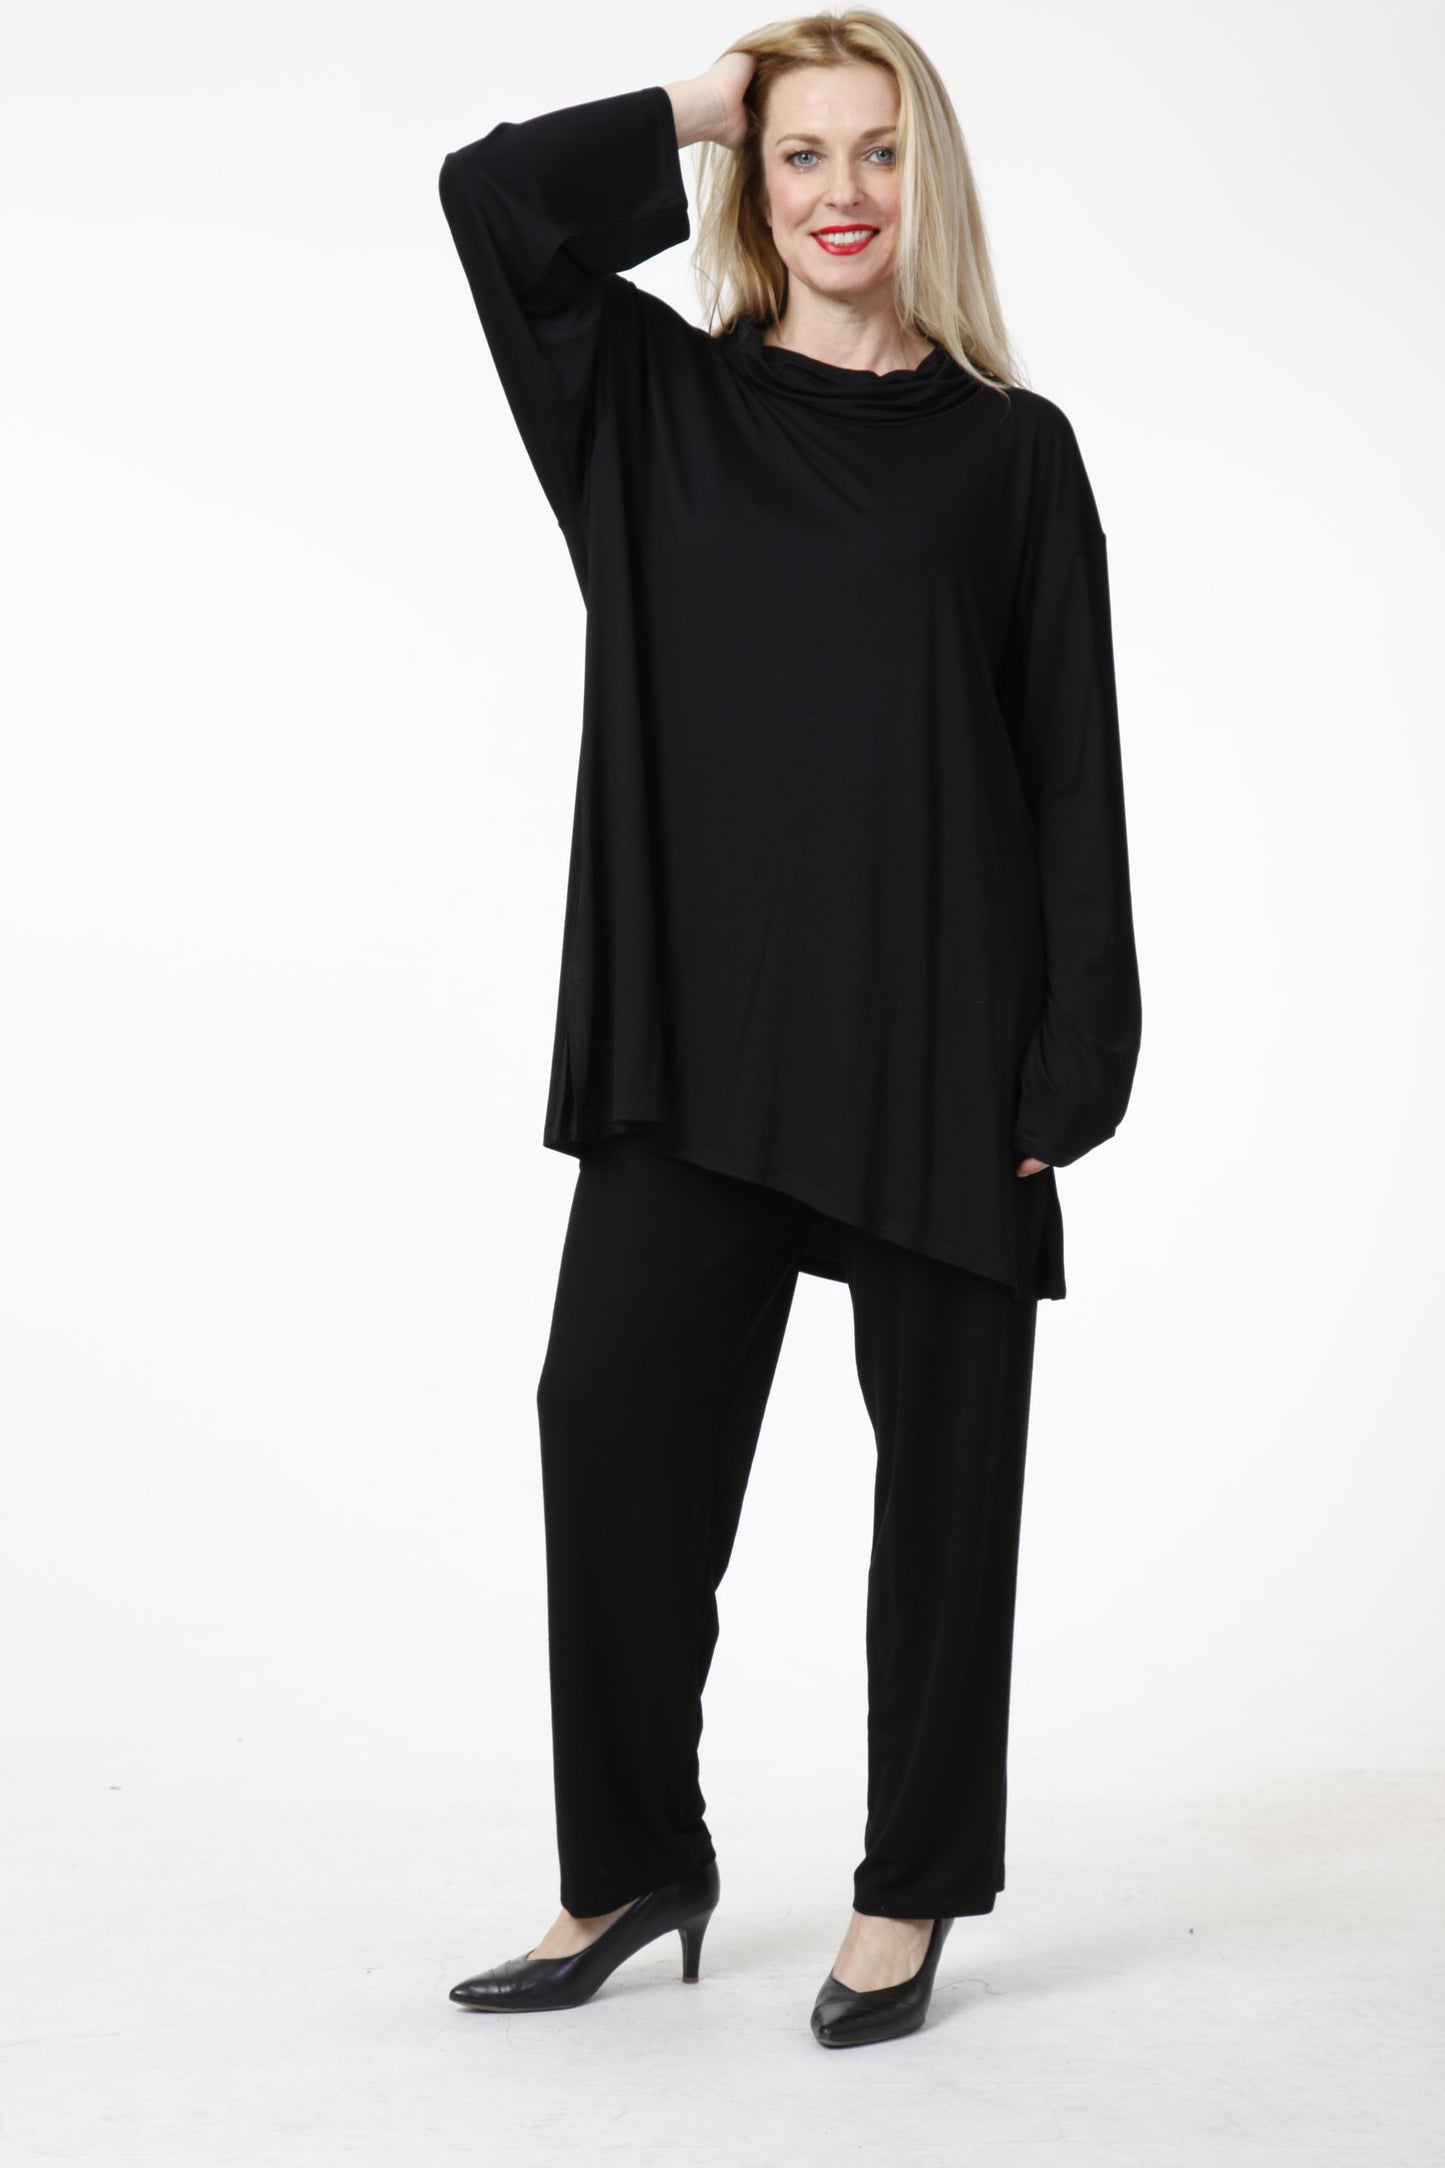 Everyday shirt in a straight shape made of fine jersey quality, viscose basics in black